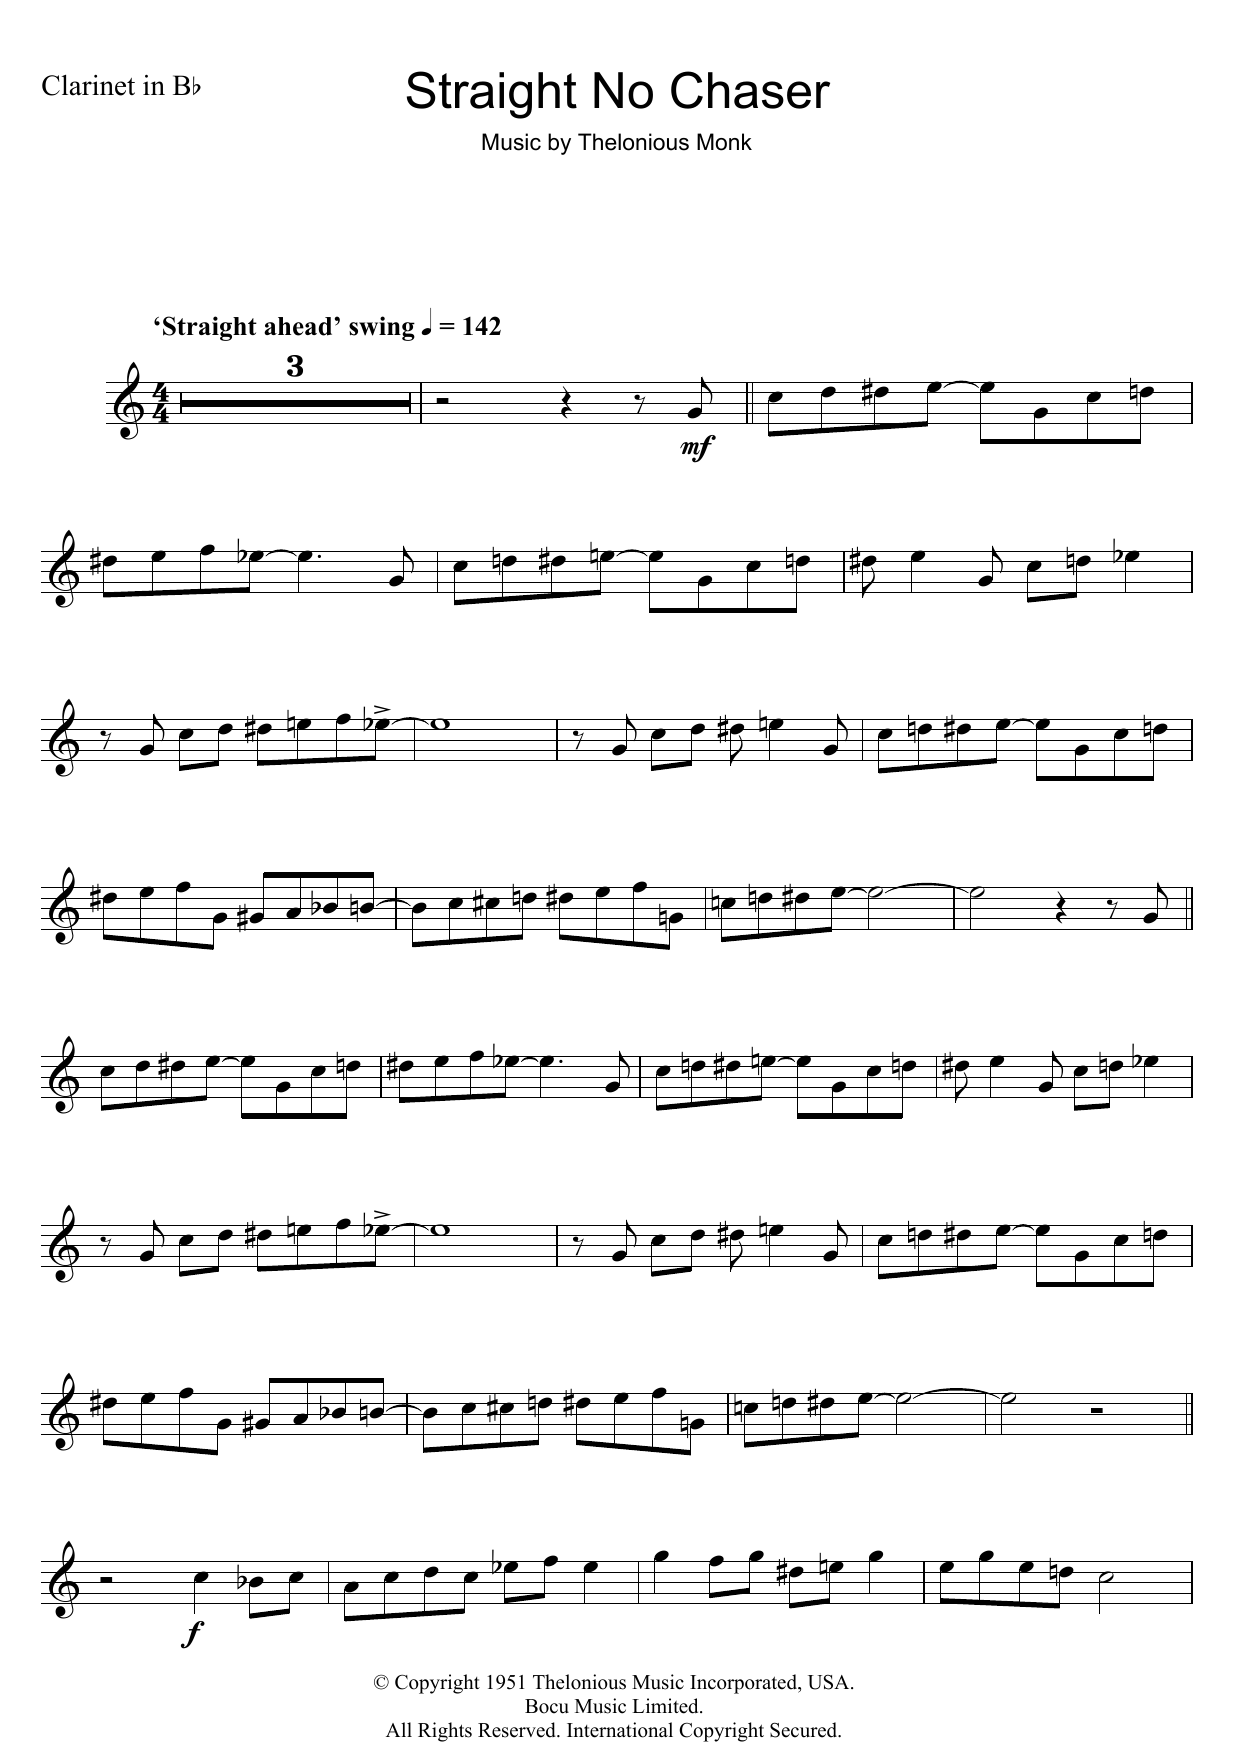 Download Thelonious Monk Straight No Chaser Sheet Music